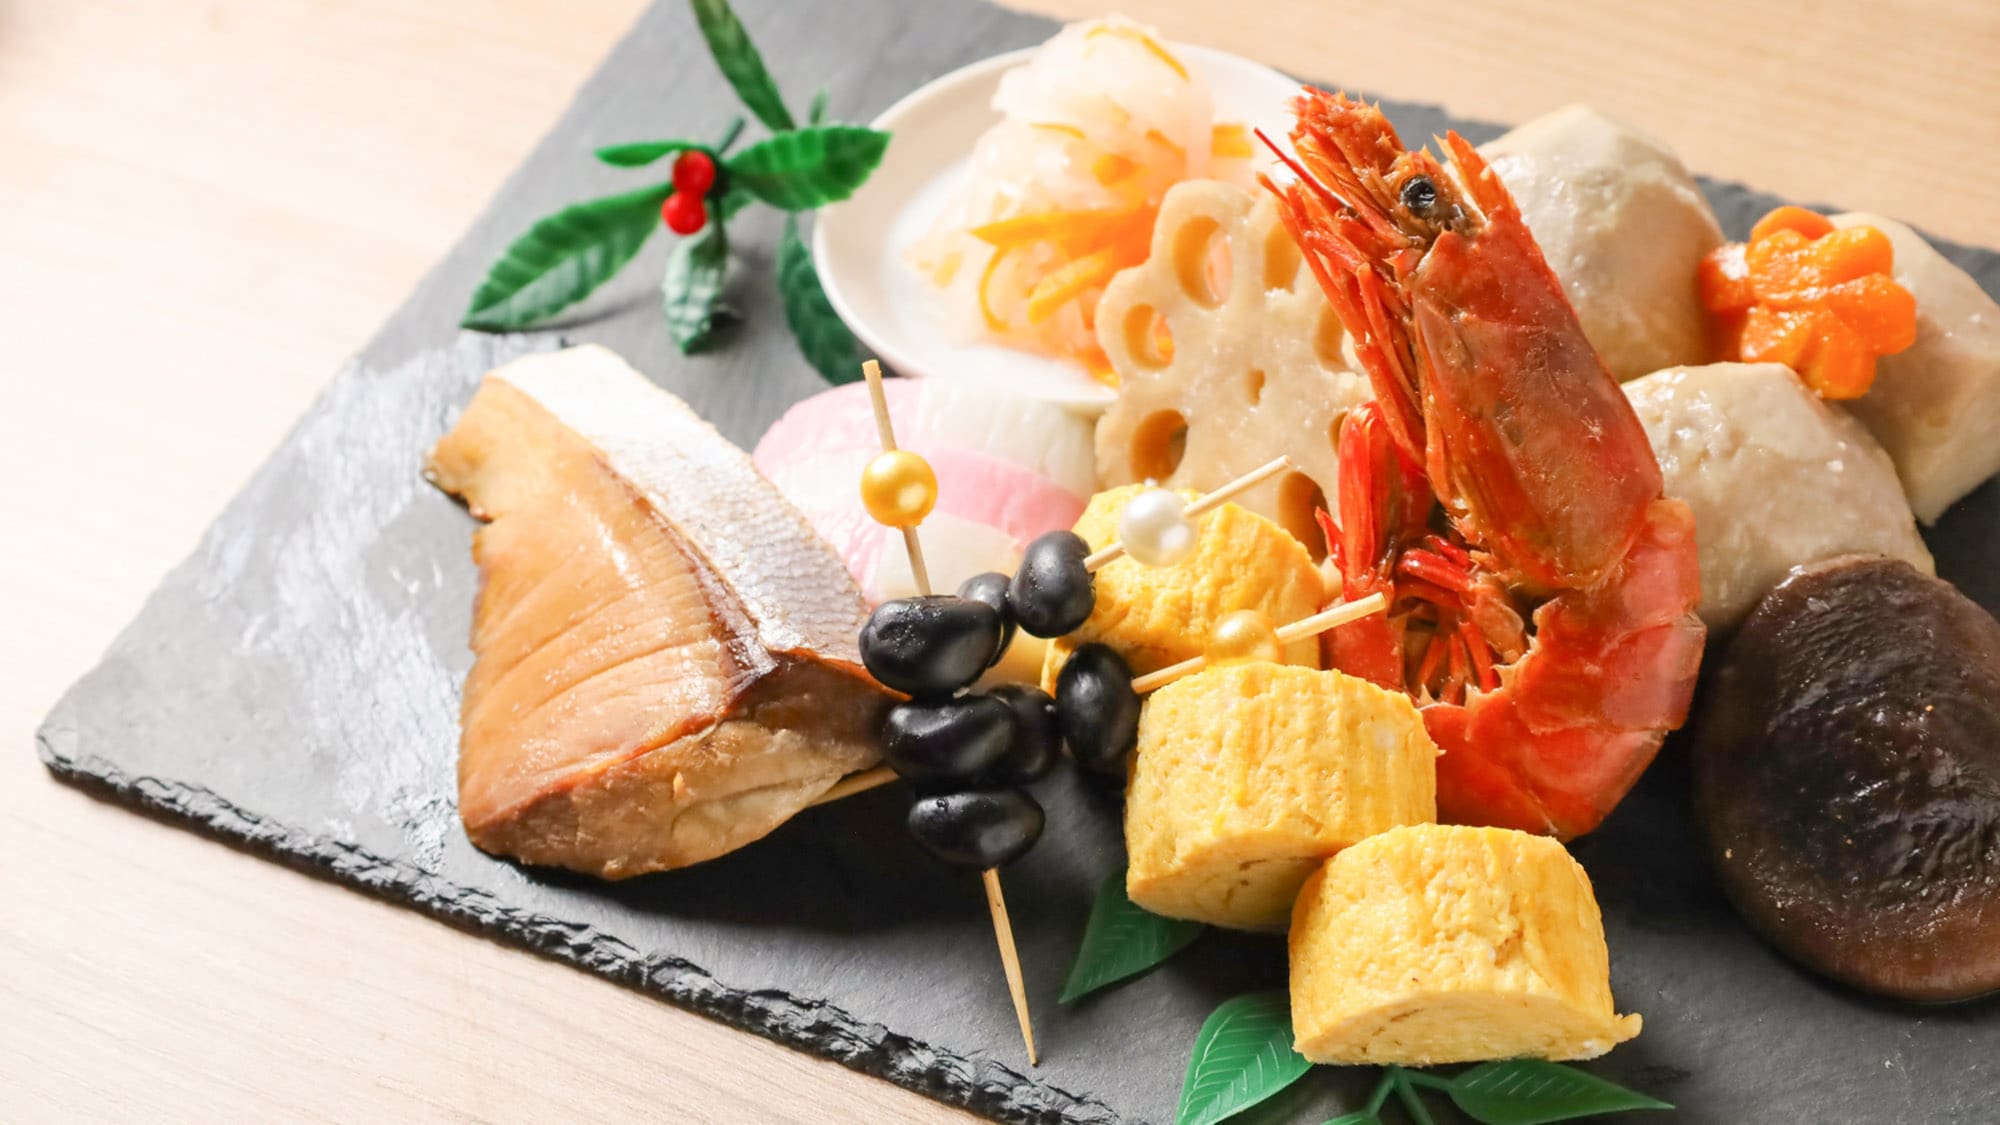 ・[Year-end and New Year Plan/Osechi] Enjoy the New Year's dishes handmade by our chef.